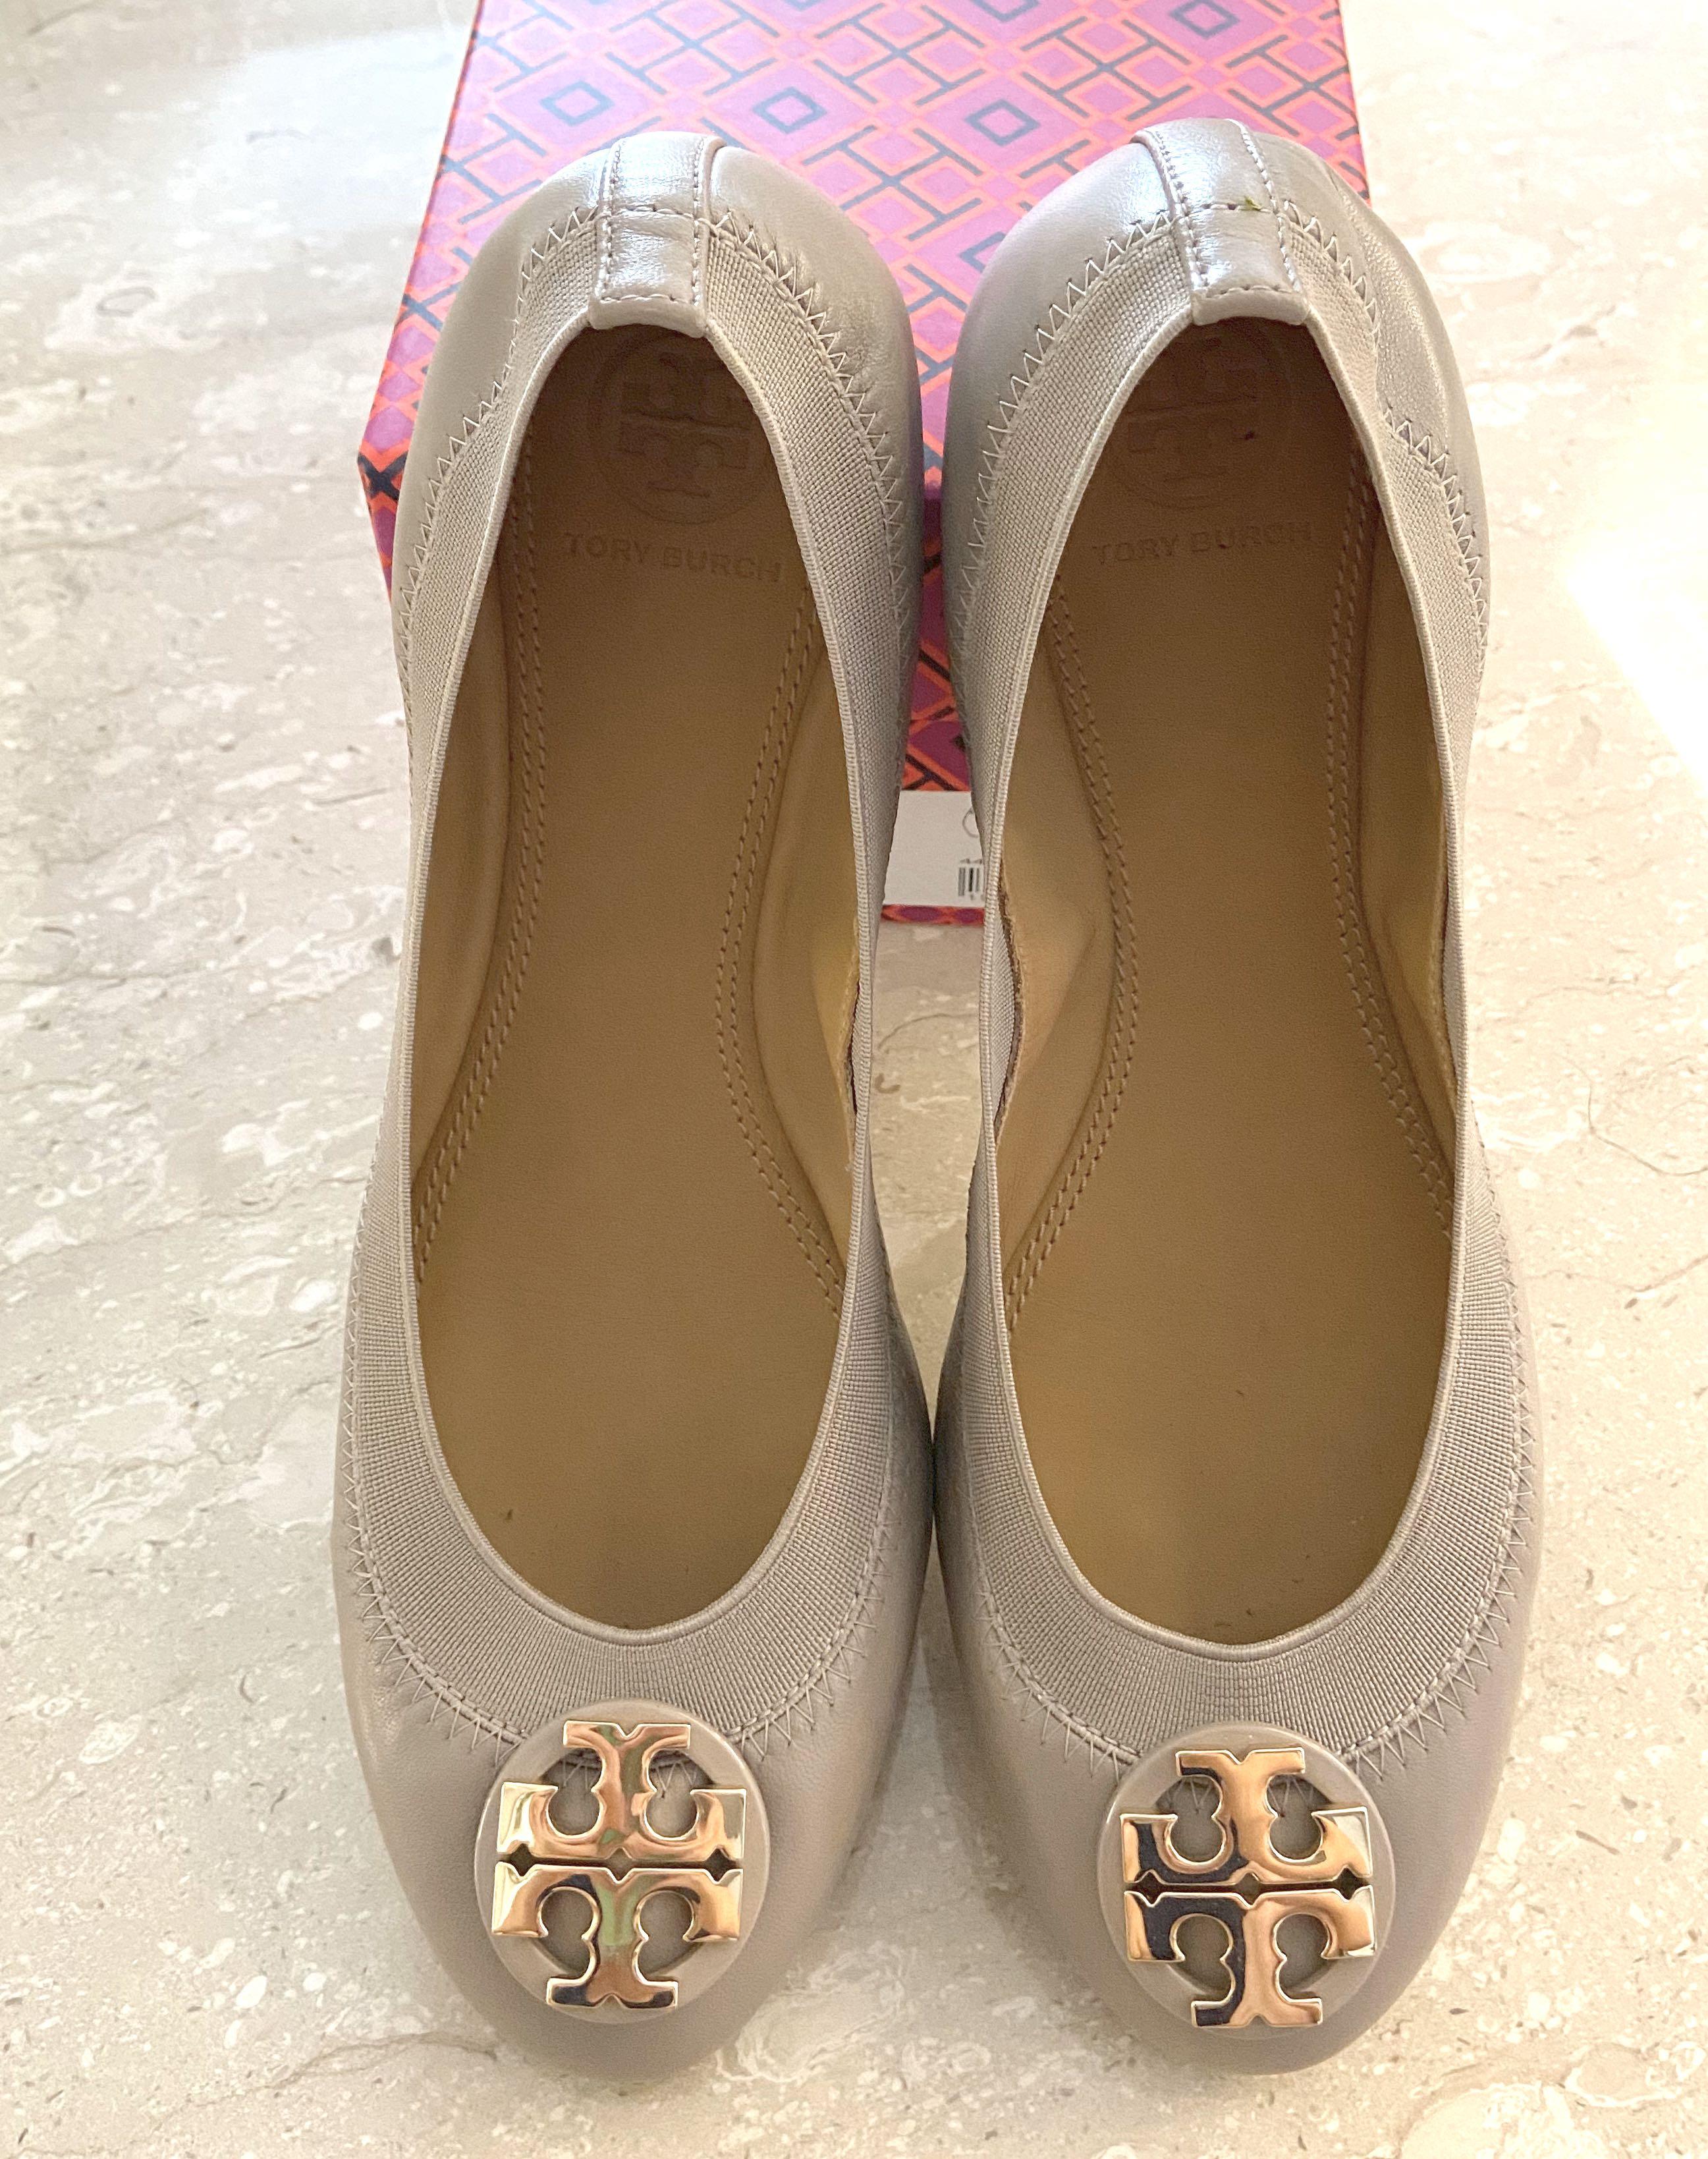 Tory Burch 36  Claire French Grey Gold Elastic nappa leather ballet flats  w Vibram soles, Women's Fashion, Footwear, Flats on Carousell